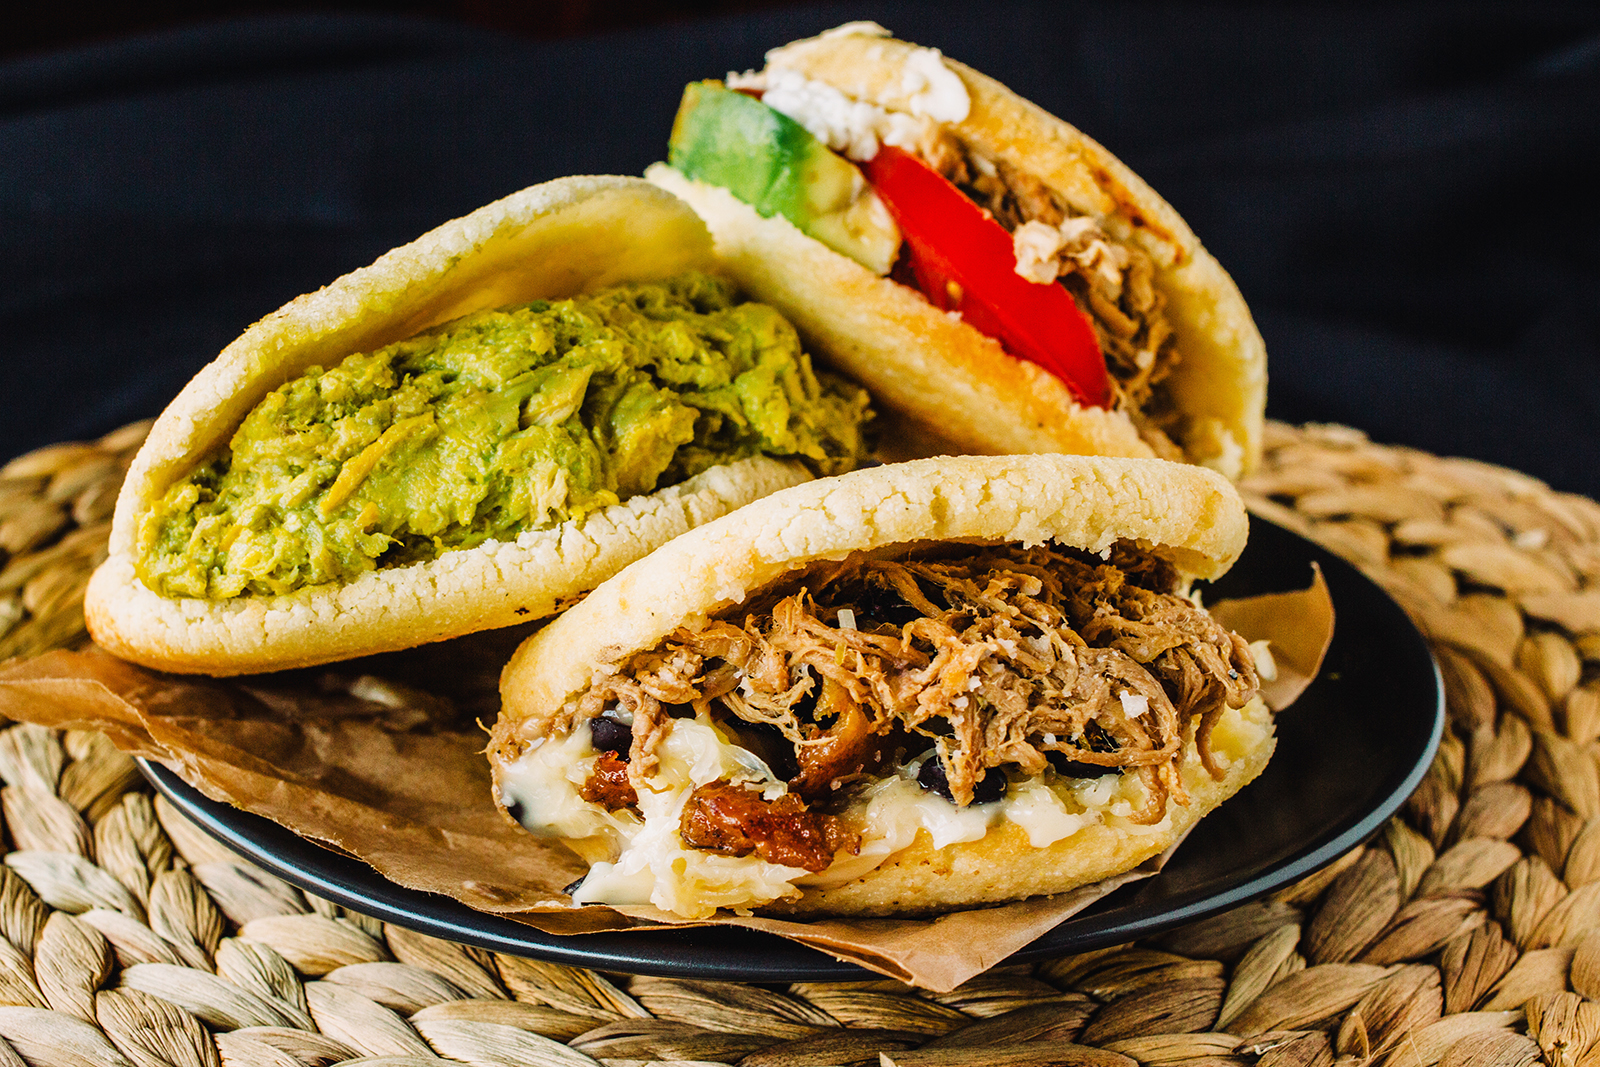 Arepa can be stuffed with various fillings. /IC